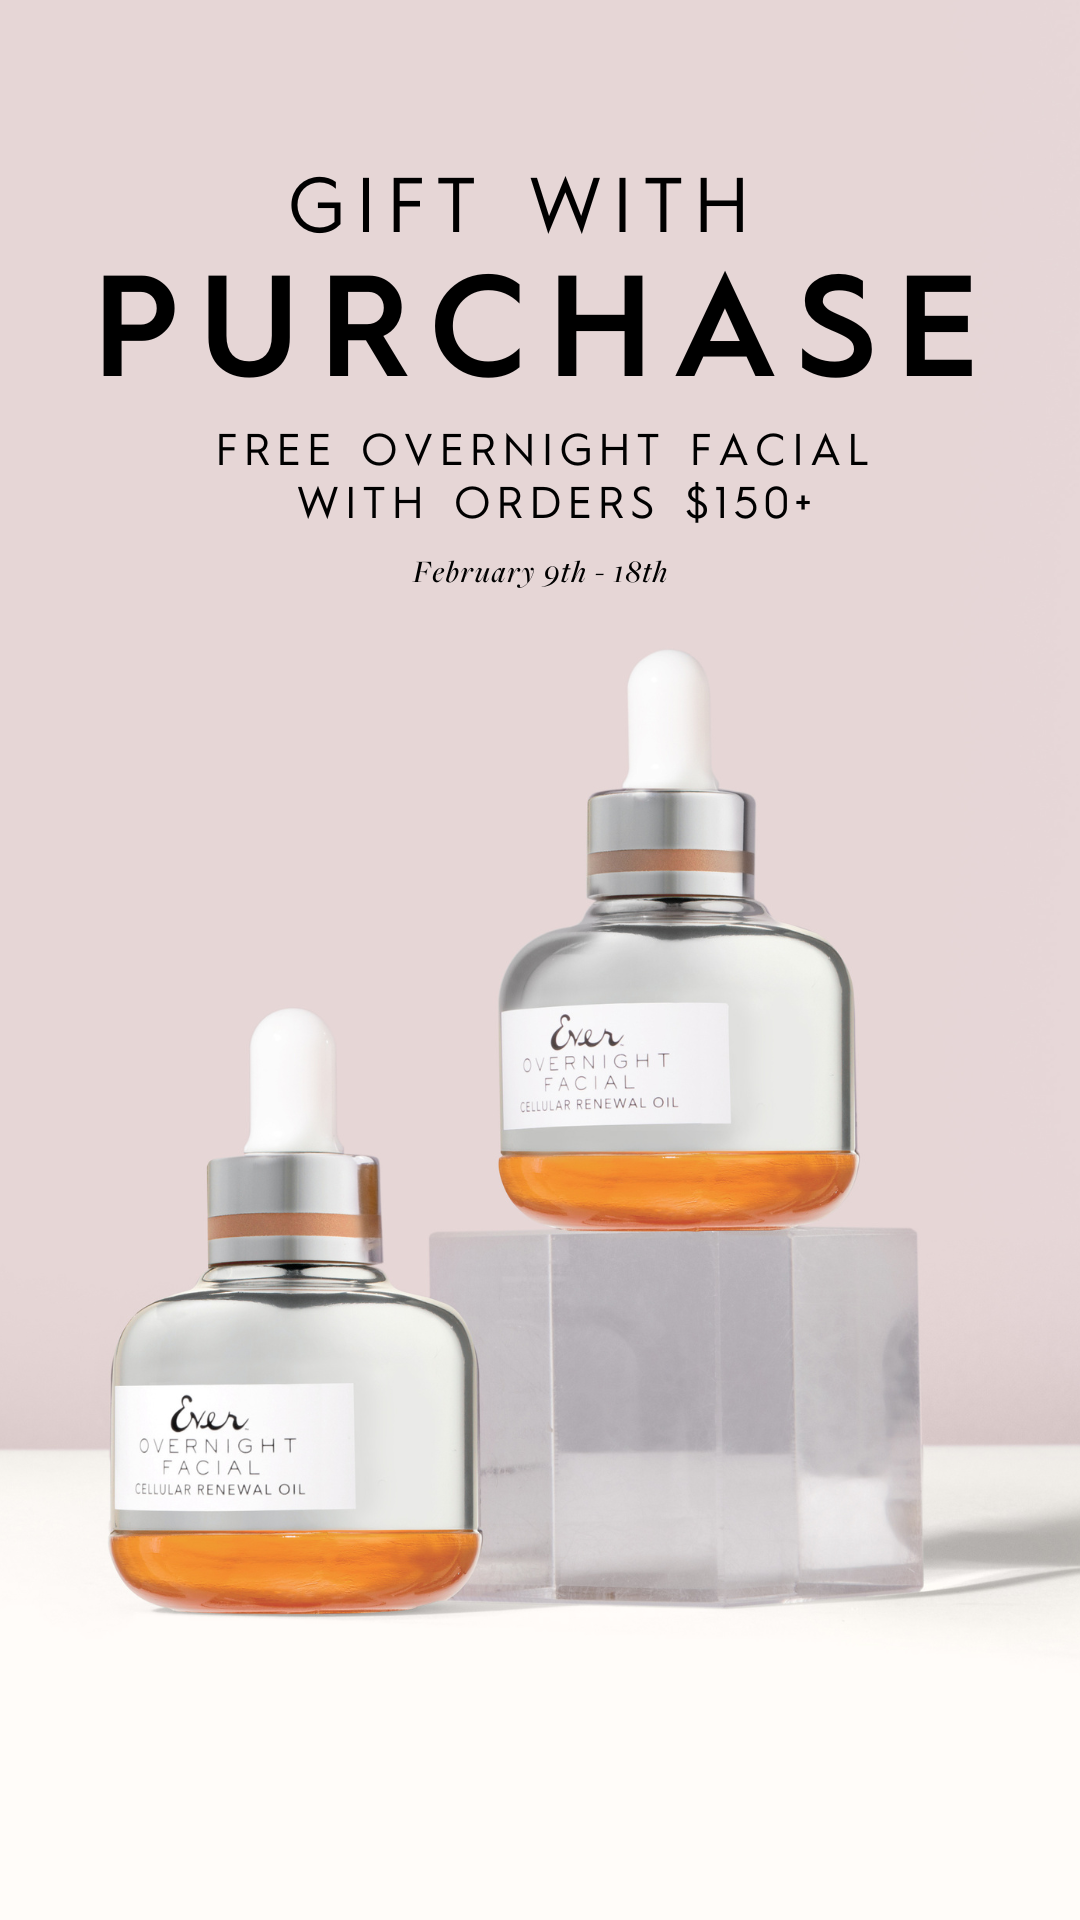 Free Overnight Facial Oil on Orders $150+